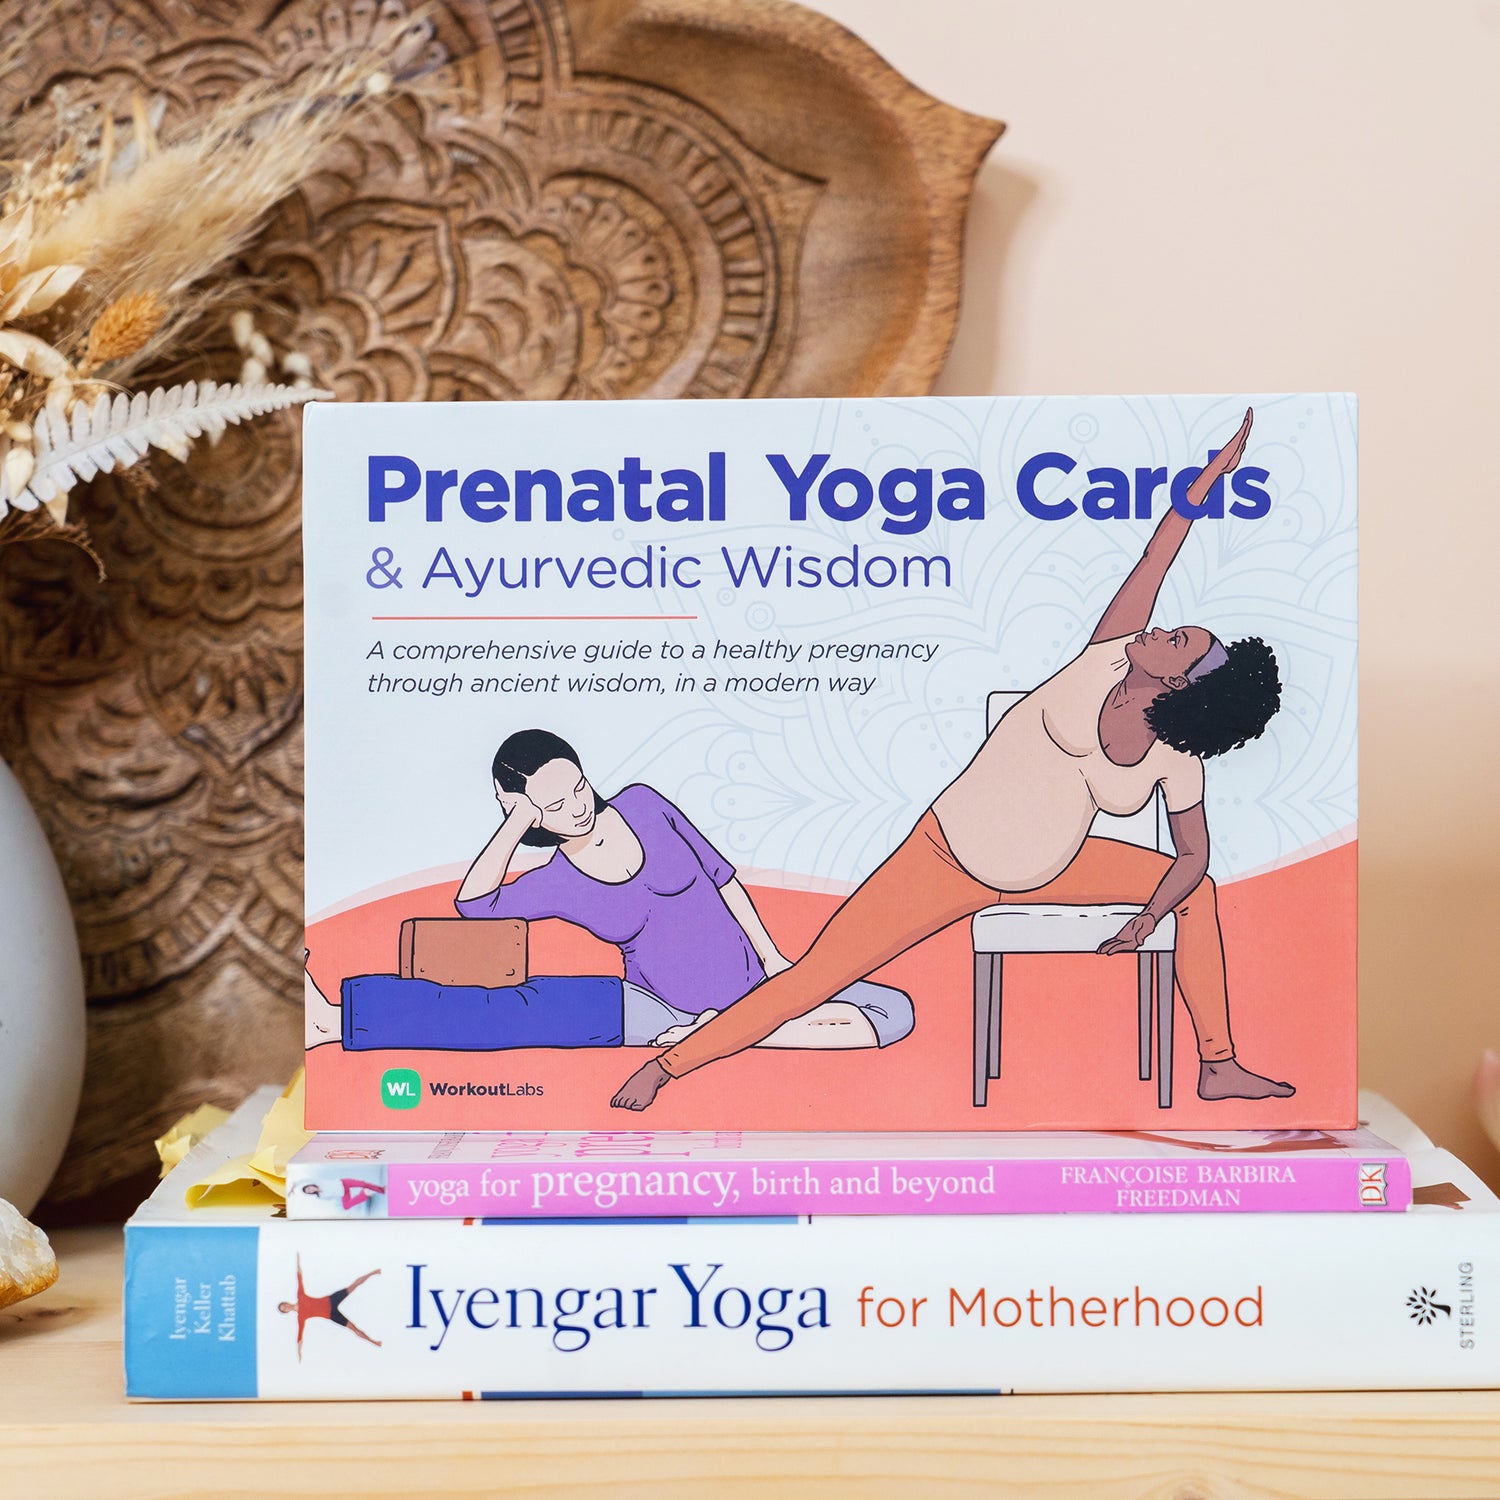 Yoga Cards – Beginner: Professional Study, Sequencing & Practice Guide